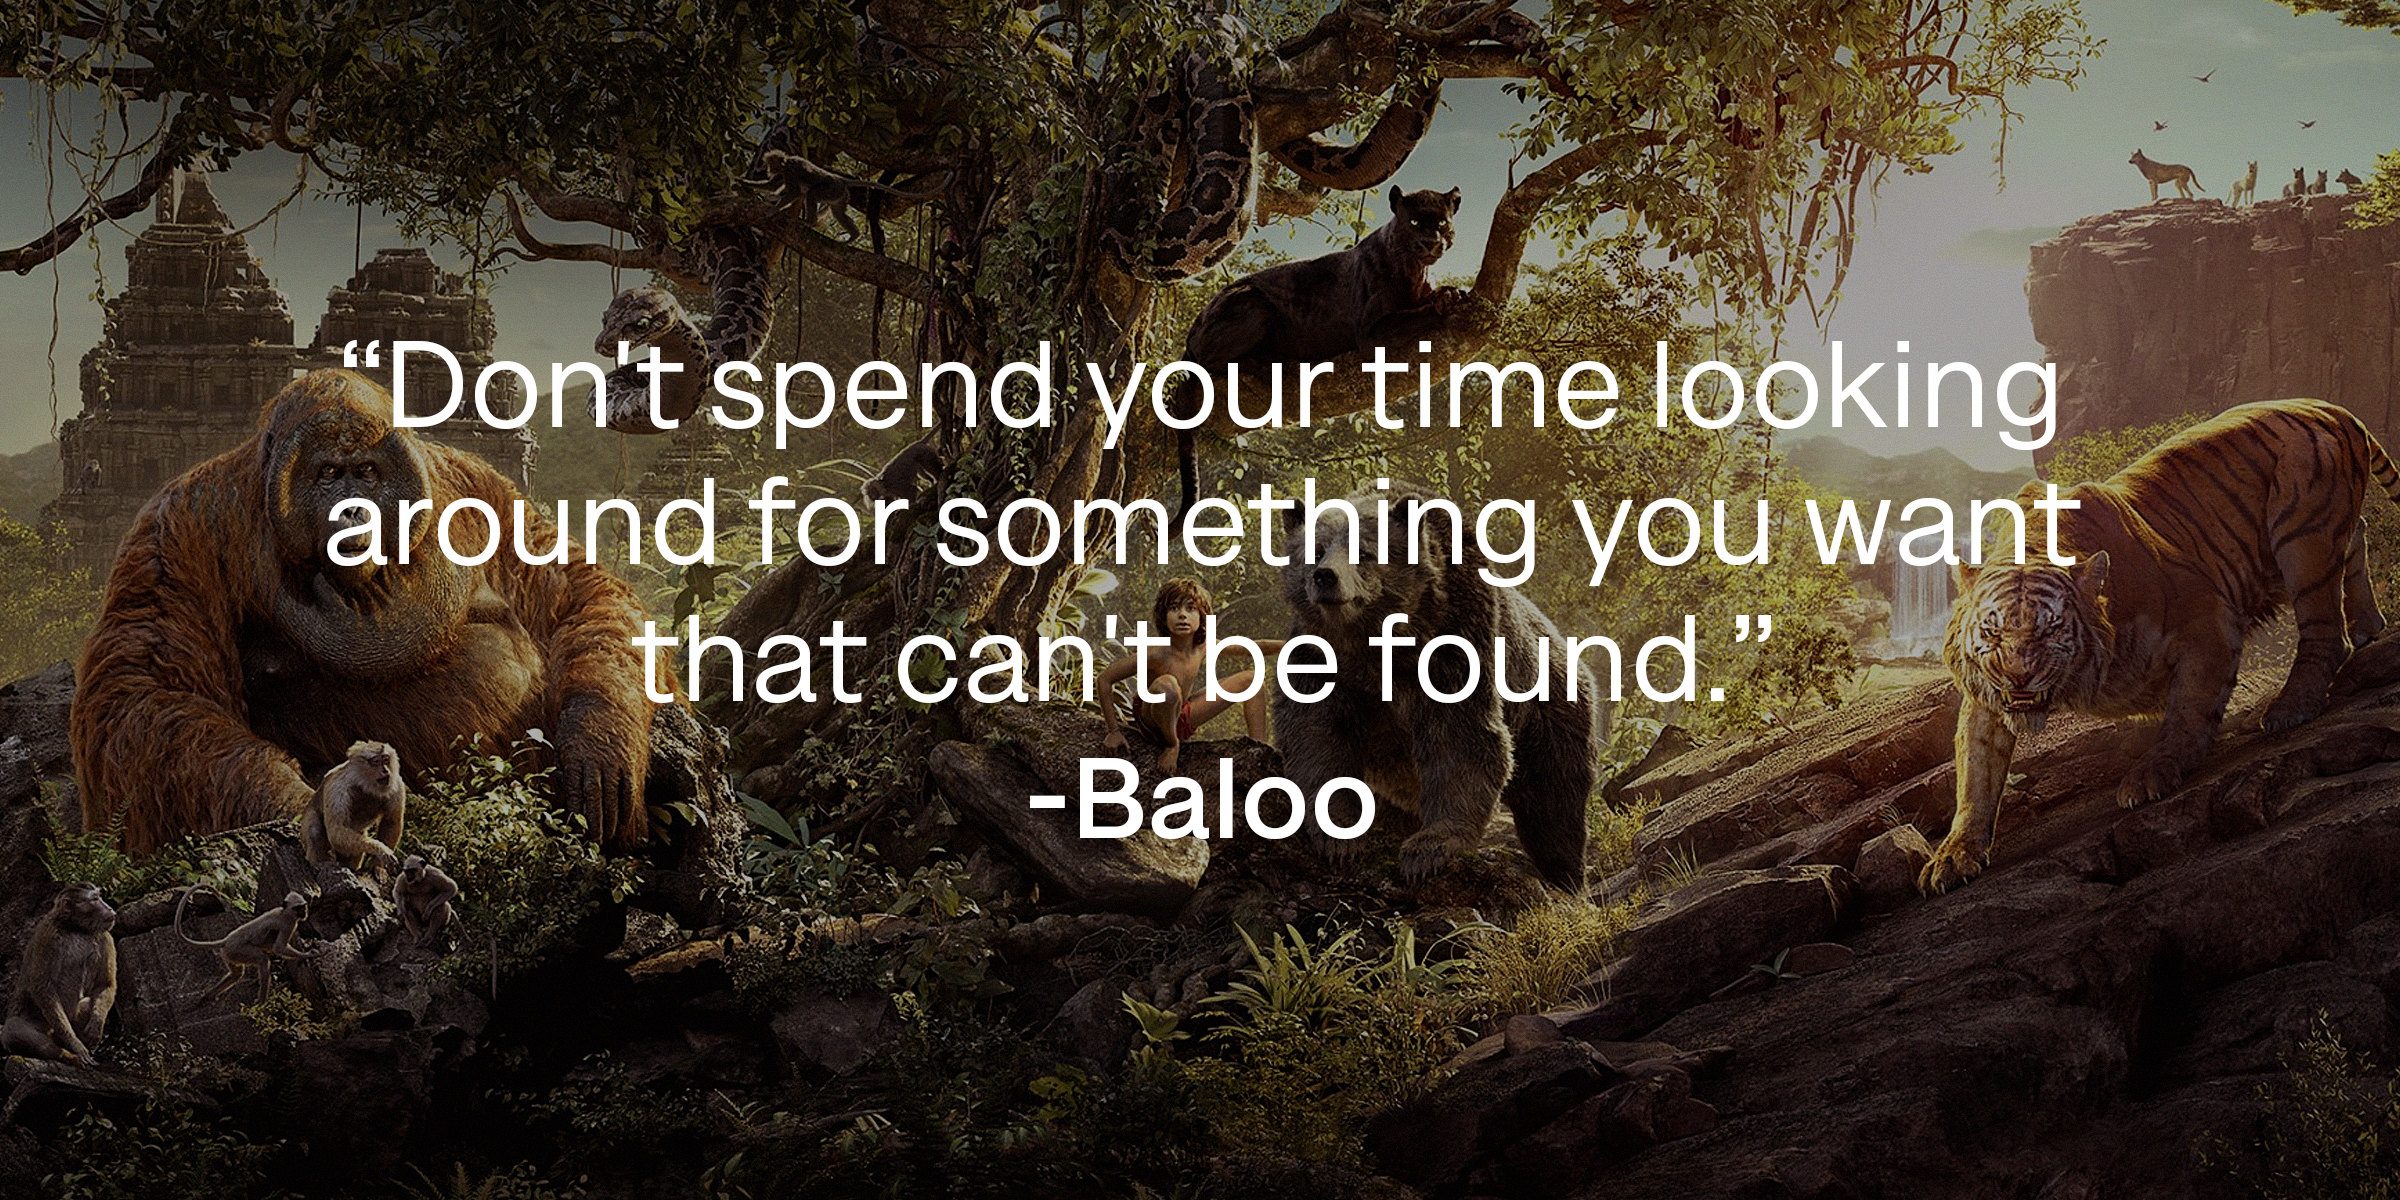 A photo of animals and a boy in the jungle from "The Jungle Book" with Baloo's quote: "Don't spend your time looking around for something you want that can't be found." | Source: facebook.com/DisneyJungleBook